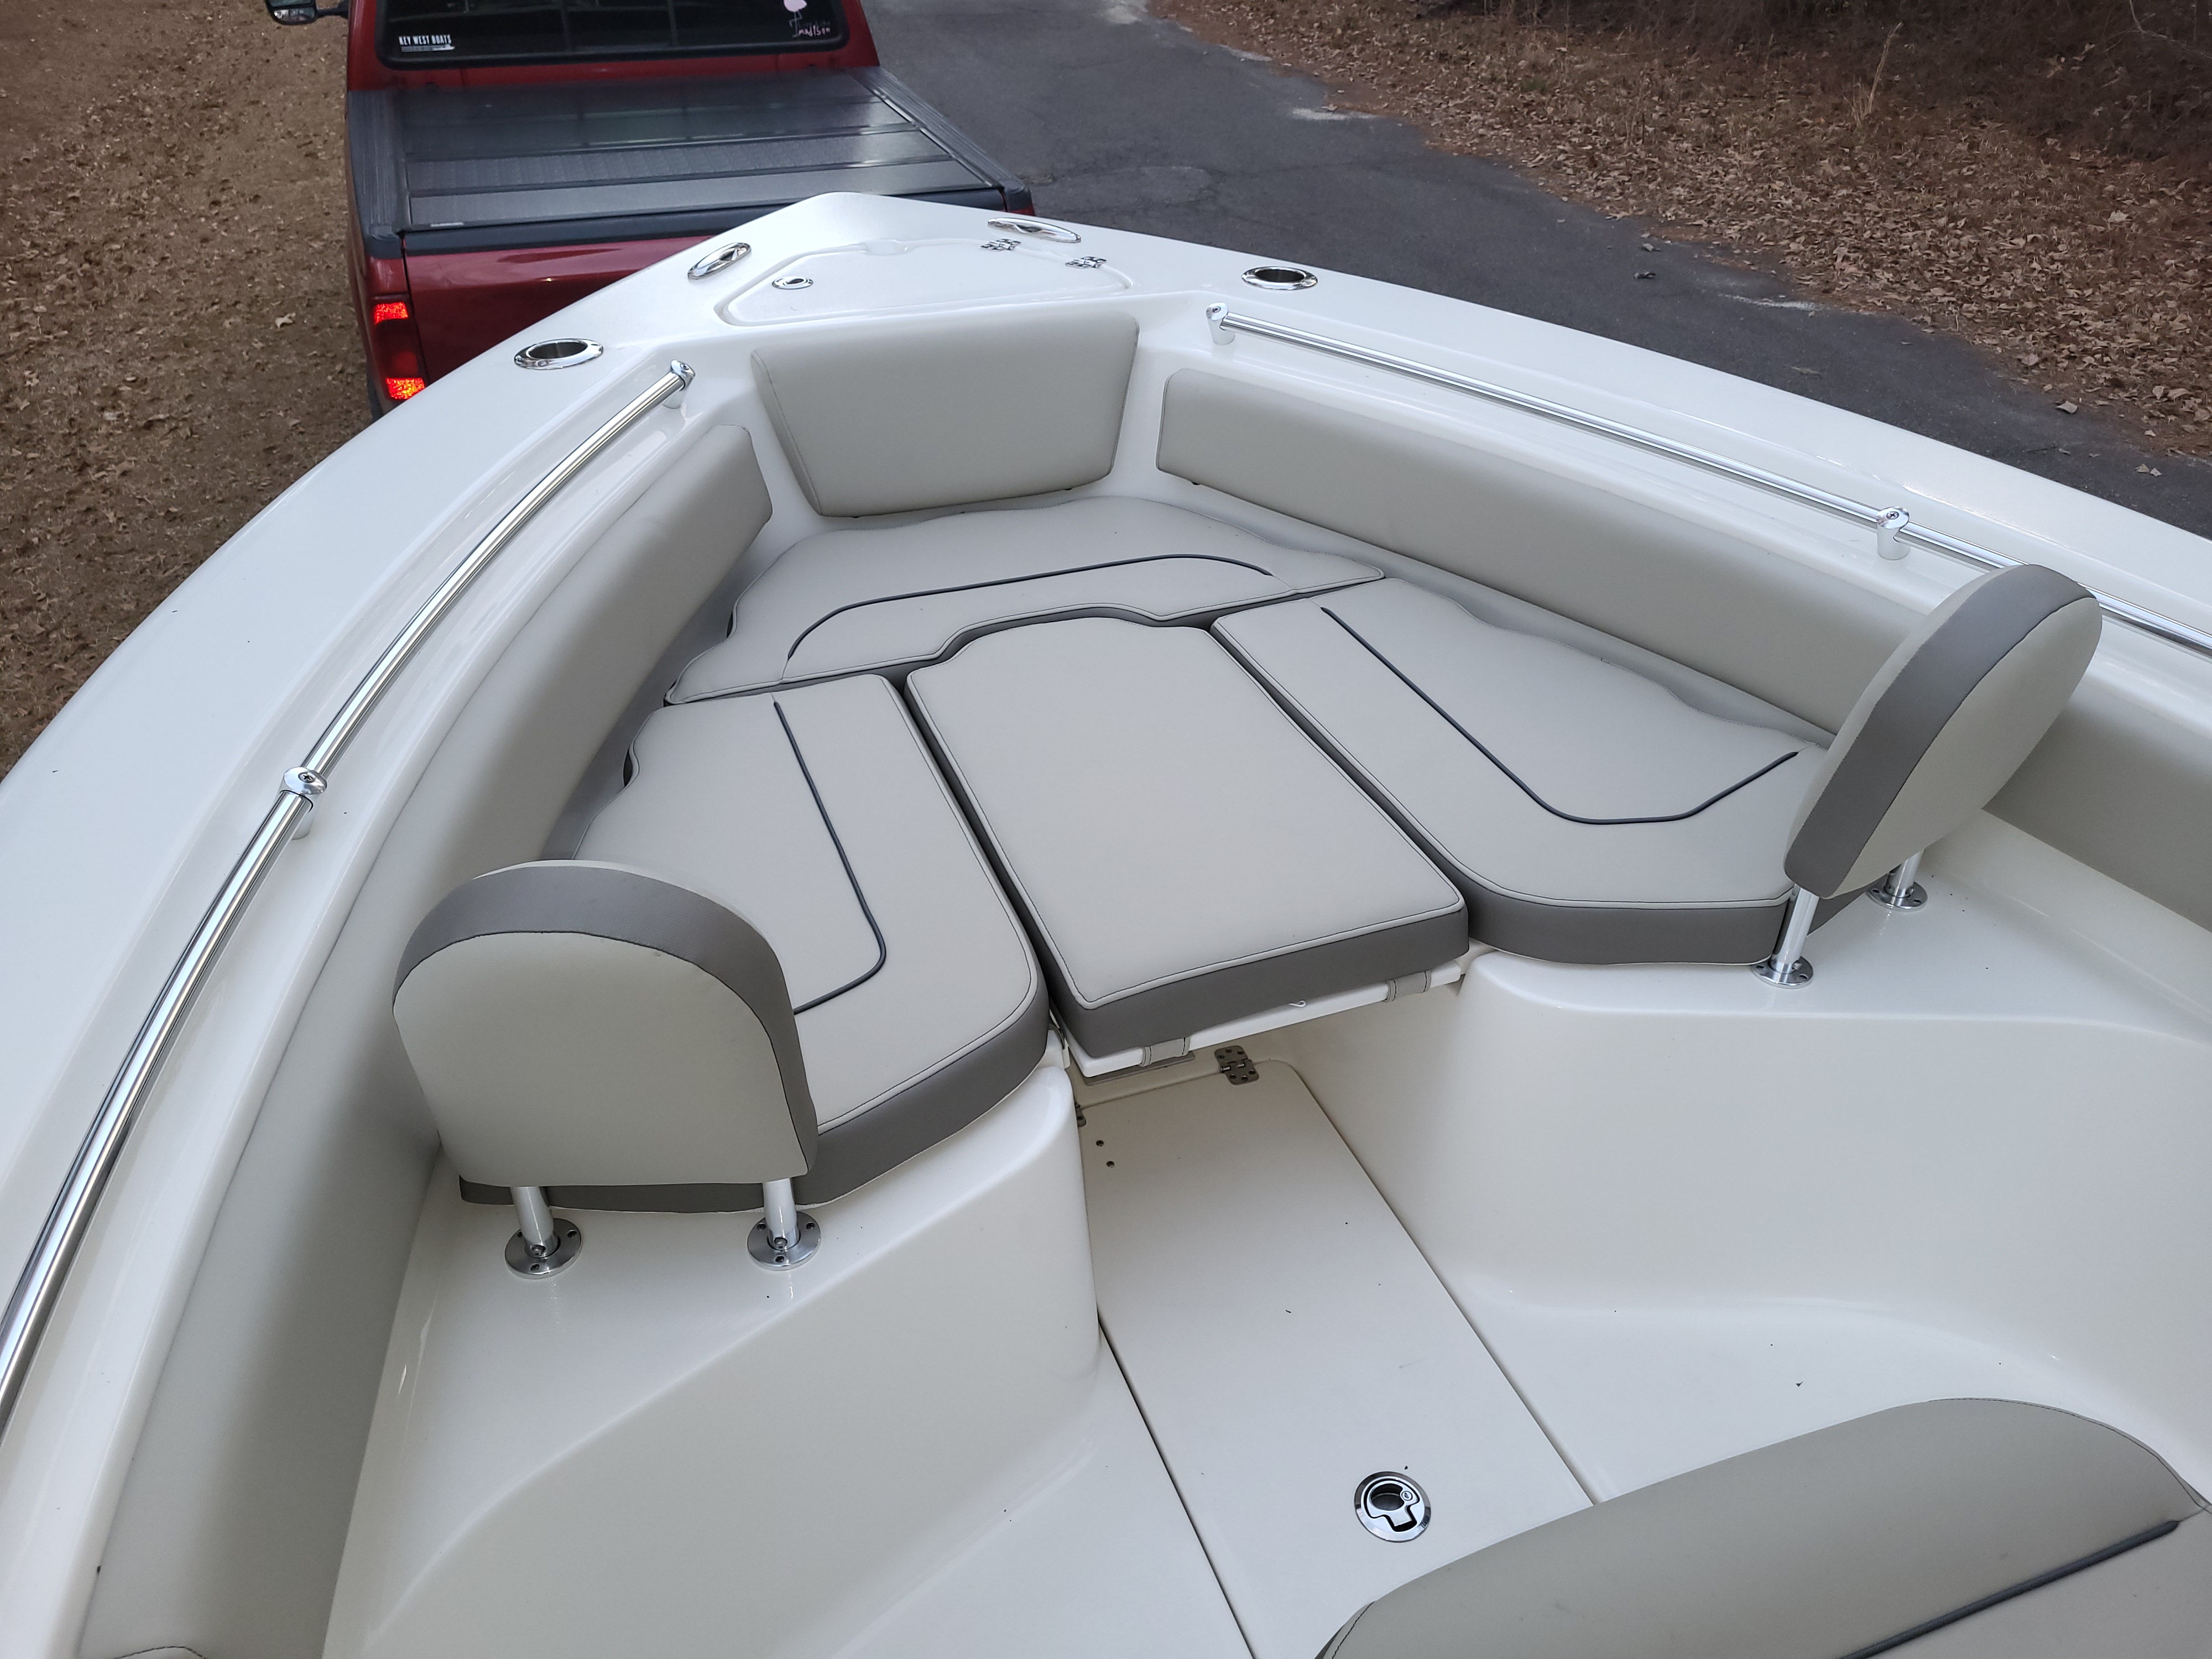 2022 Key West 239FS Power boat for sale in Laurinburg, NC - image 7 